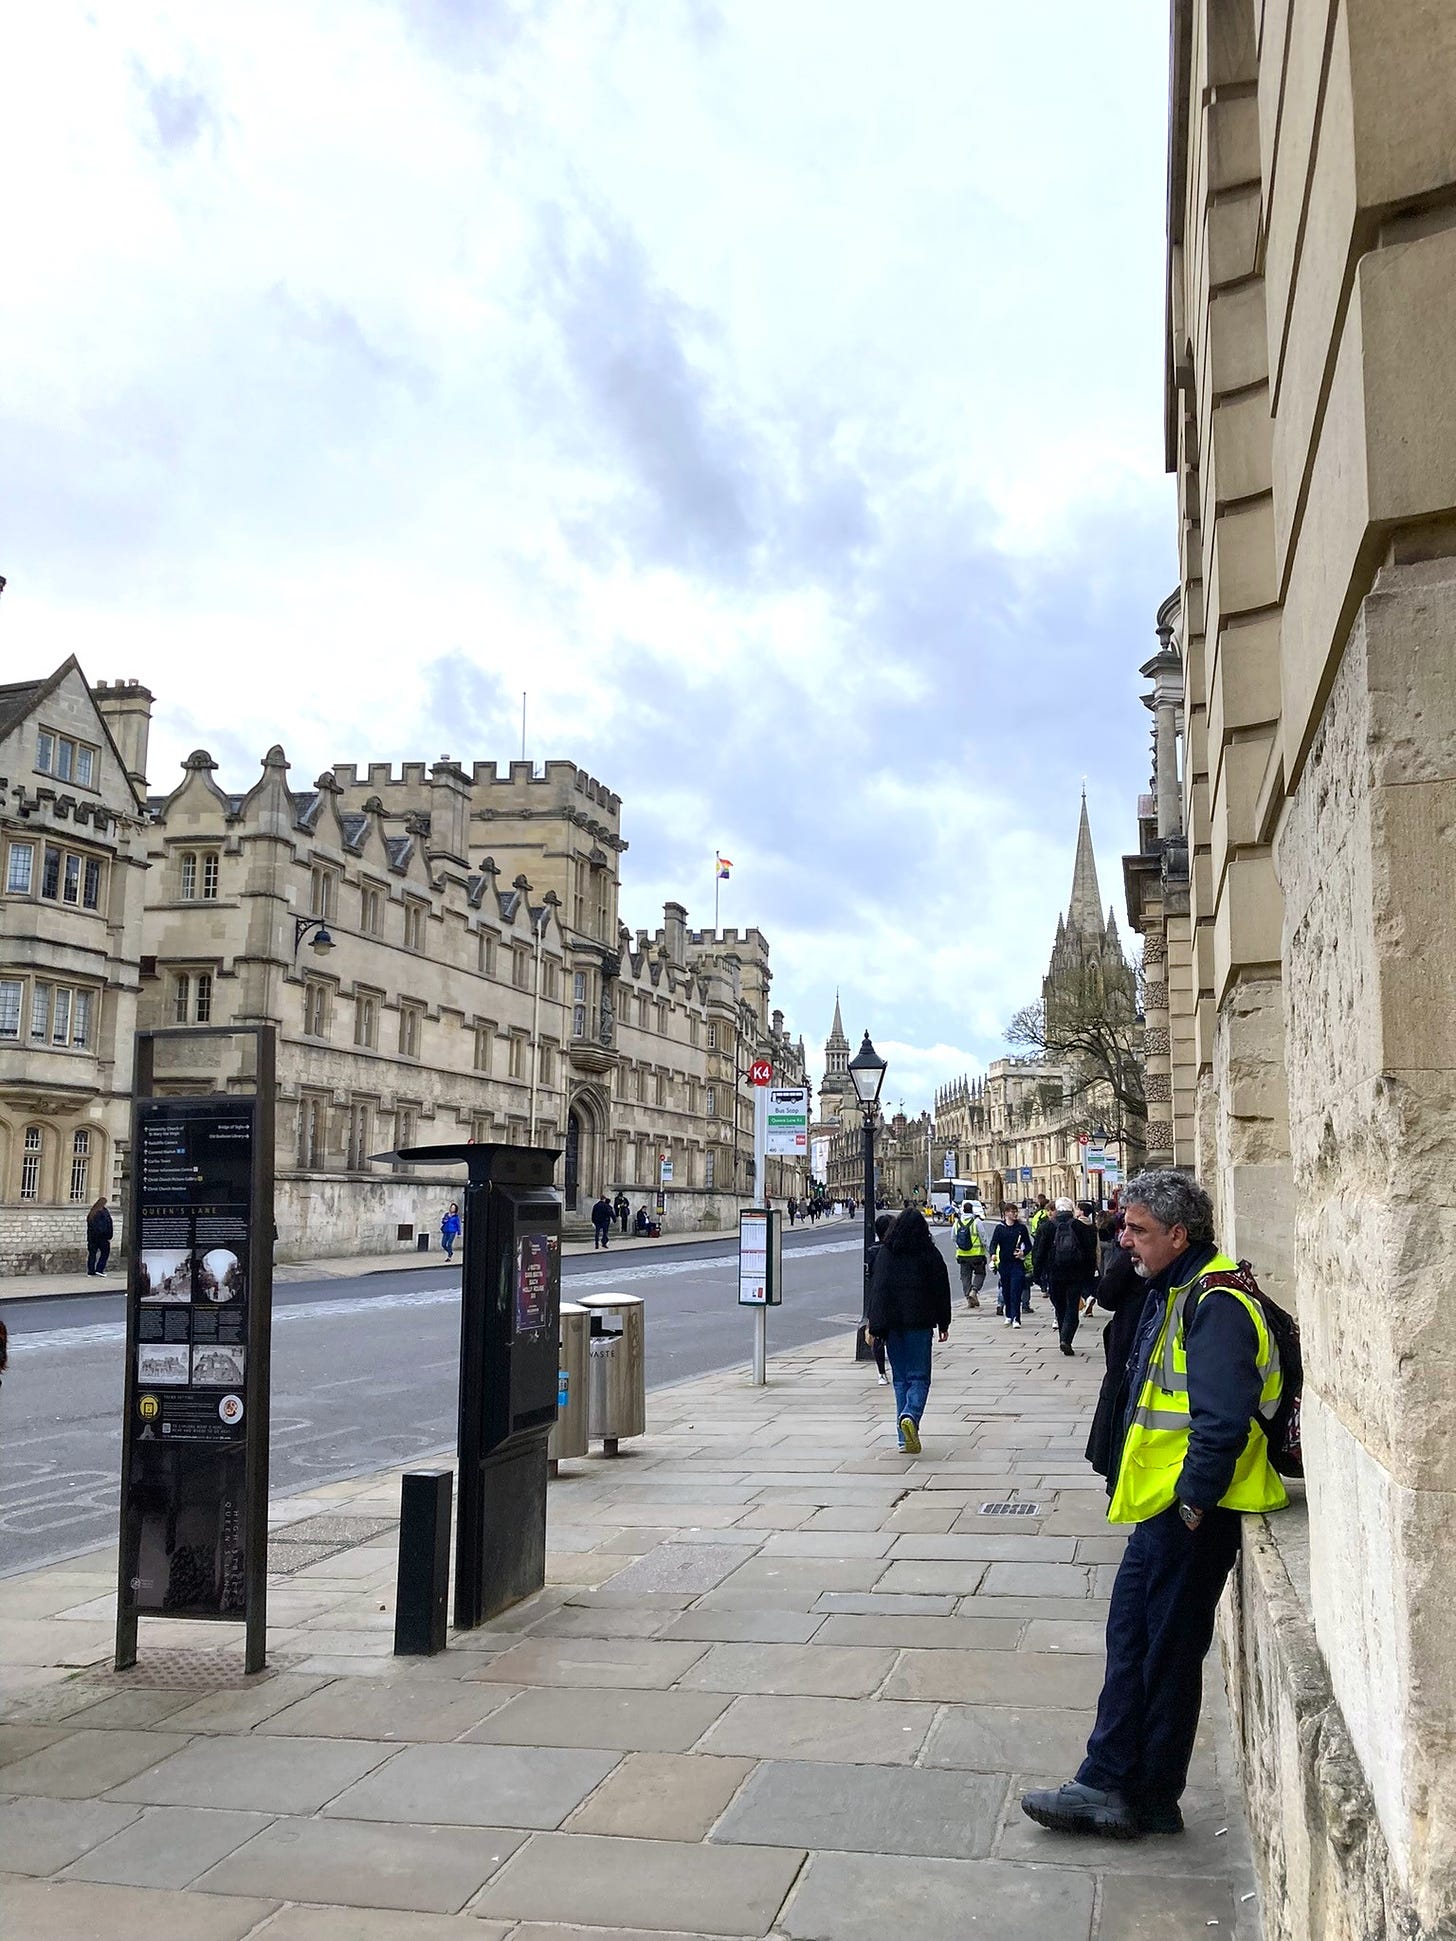 The creamy building of Oxford high street against a blue cloudy sky. A man in a high-vis jacket is in the foreground.